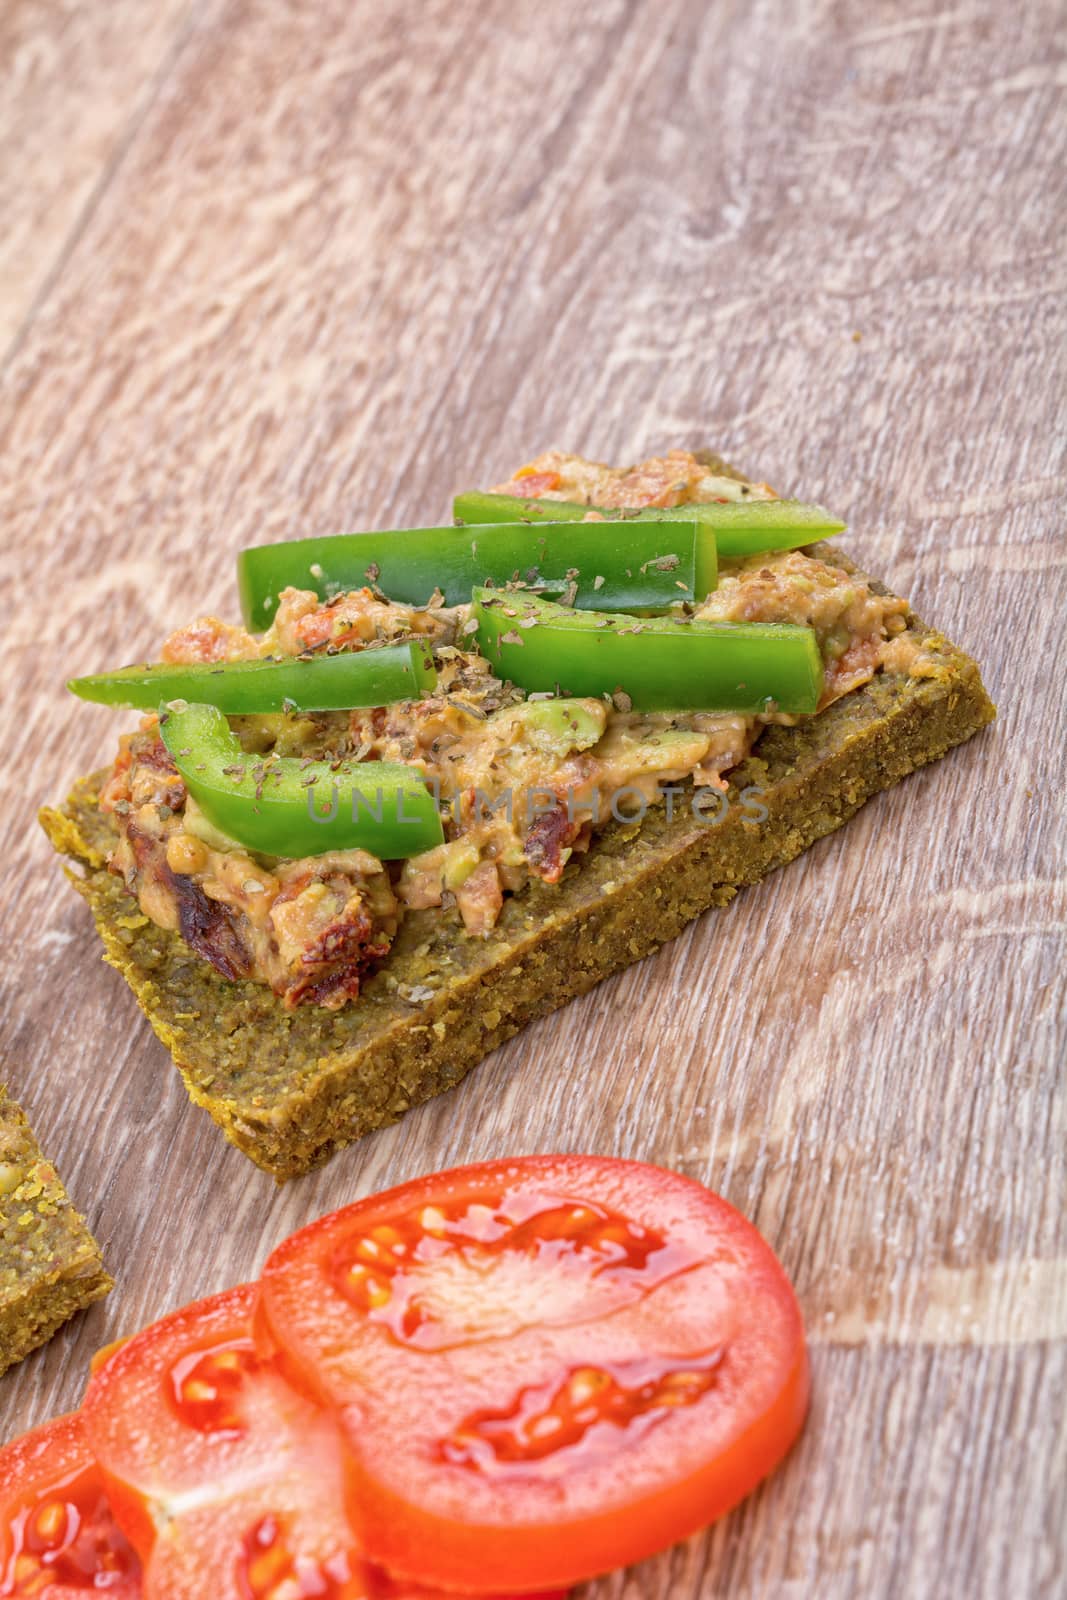 Raw bread with a spread decorated with green pepper and tomatoes